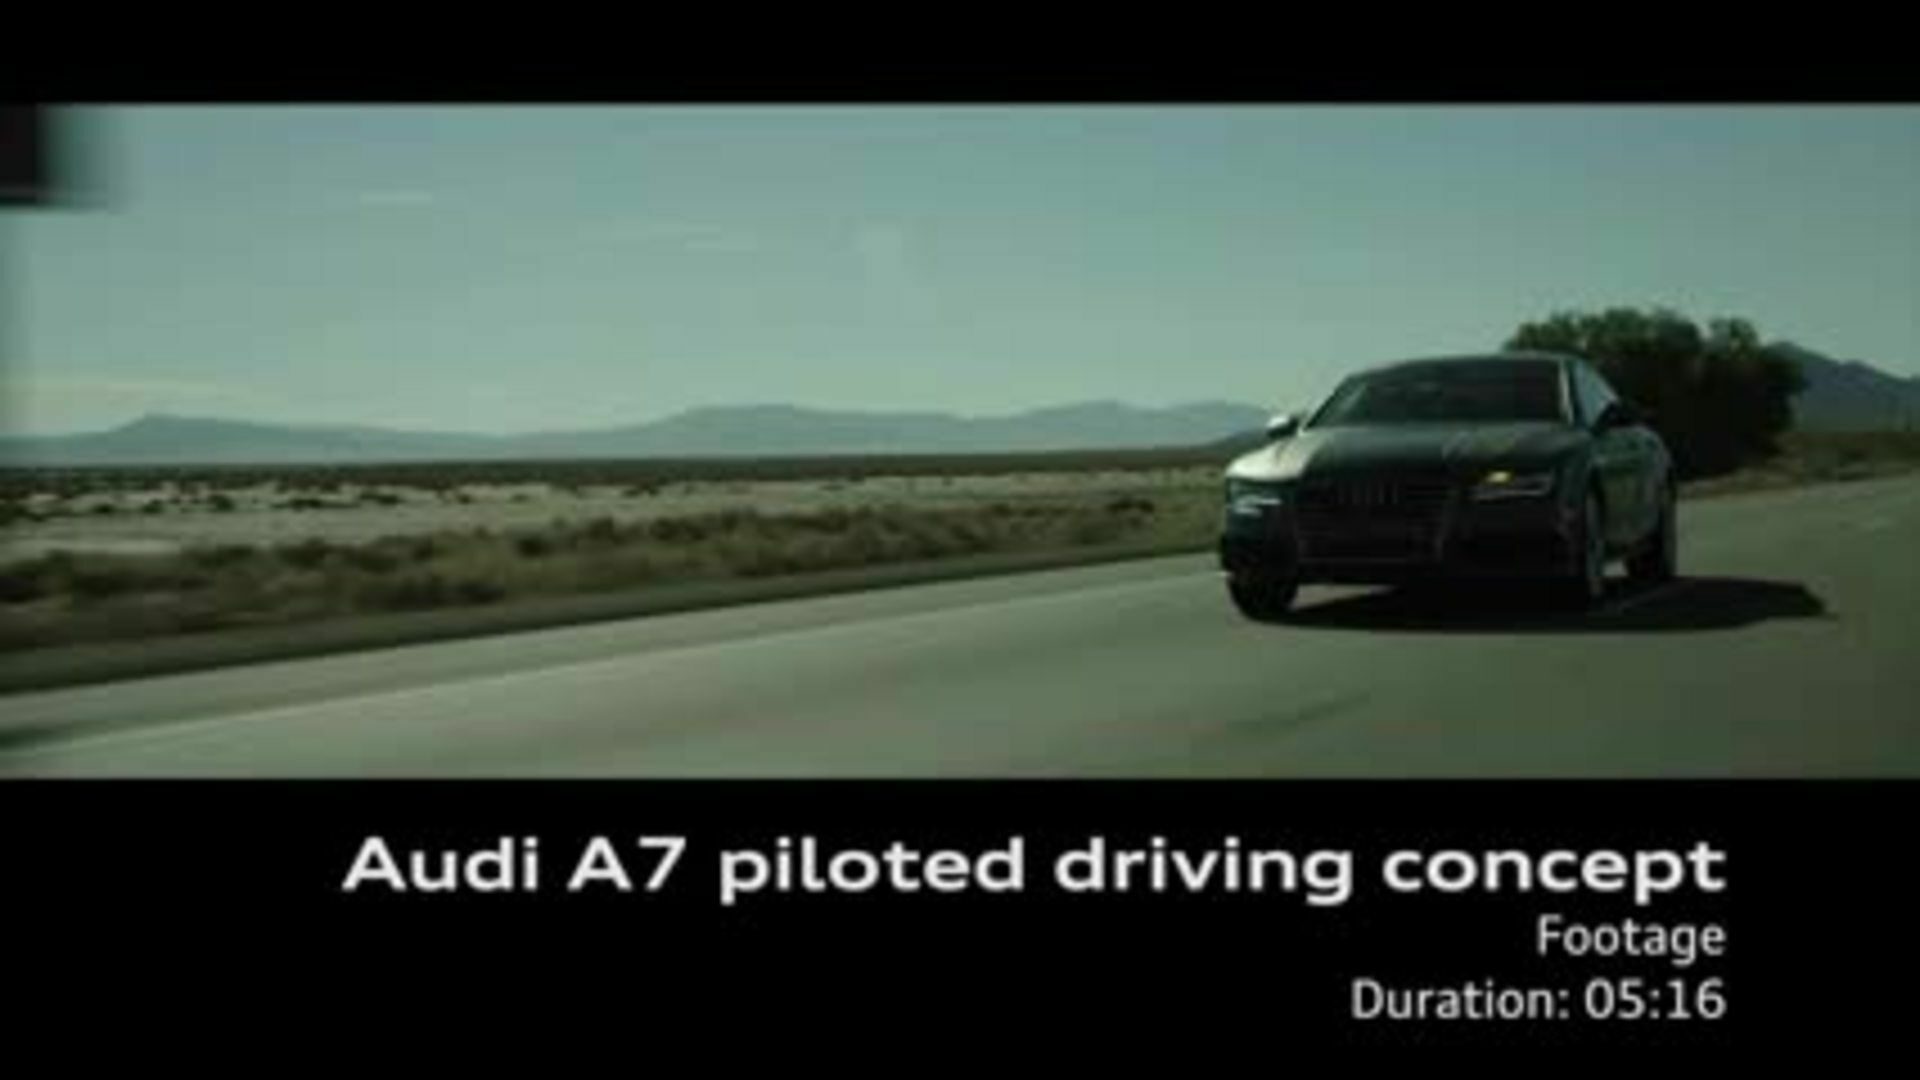 Audi A7 Sportback piloted driving concept - Footage